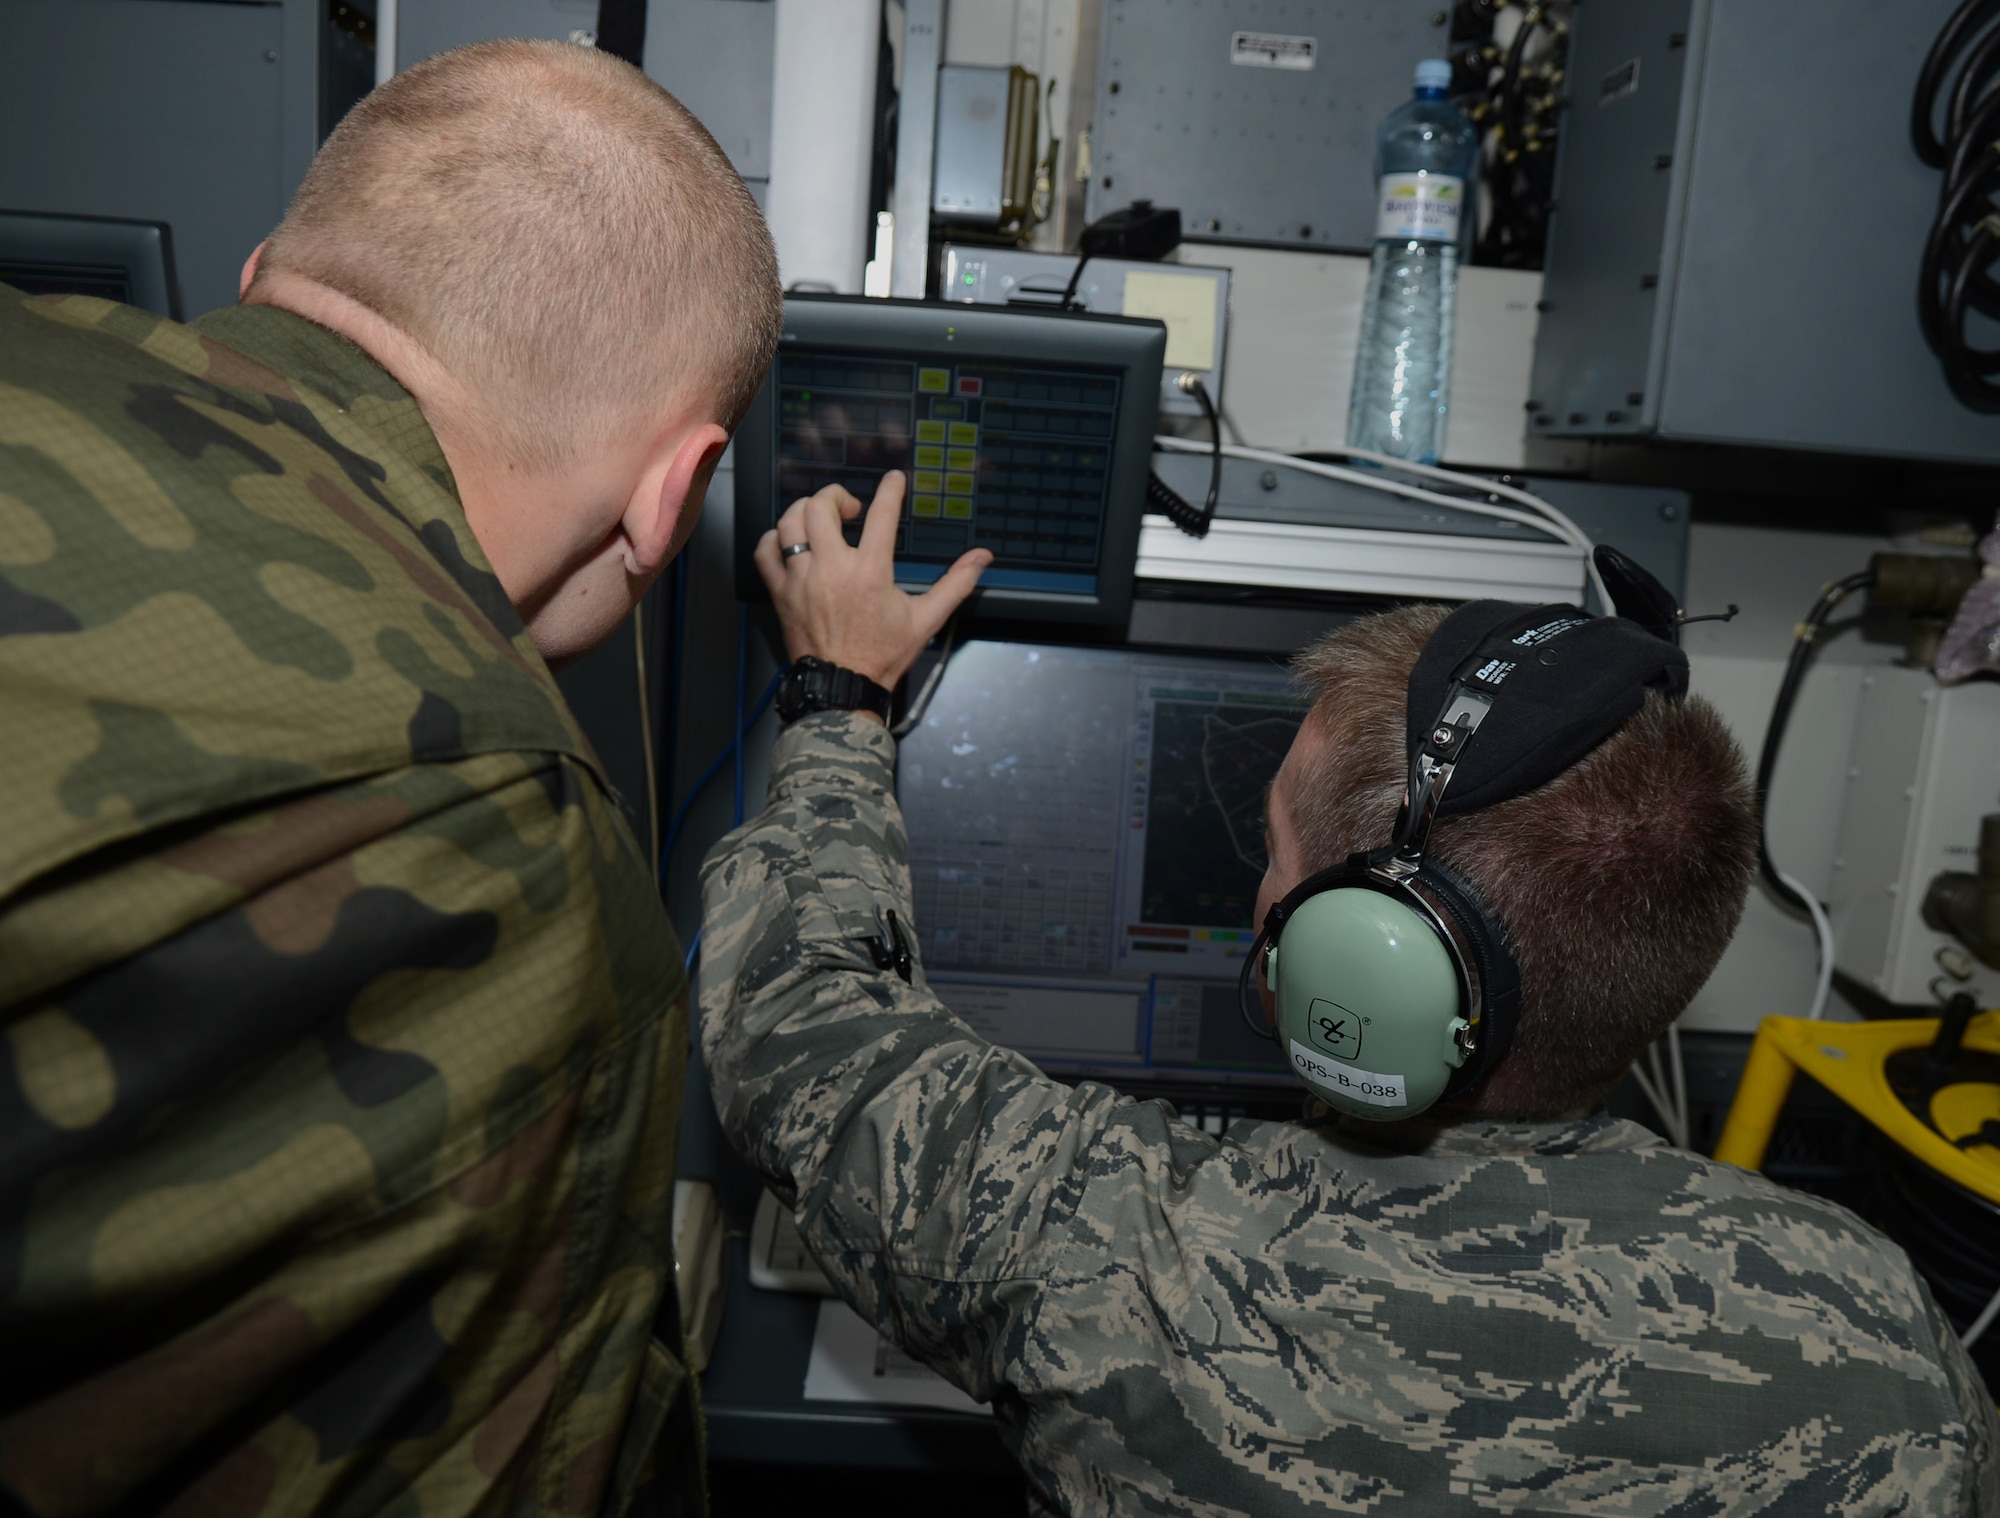 U.S. Air Force Capt. Brad Dvorak, right, 606th Expeditionary Air Control Squadron chief of weapons and tactics from Cedar Rapids, Iowa, discusses communications and control tactics with a Polish air force service member during an EAGLE TALON mission June 12, 2014, at Powidz Air Base, Poland. Exercises like EAGLE TALON enable the U.S. Air Force to promote interoperability with its European partners. (U.S. Air Force photo/Airman 1st Class Kyla Gifford/Released)